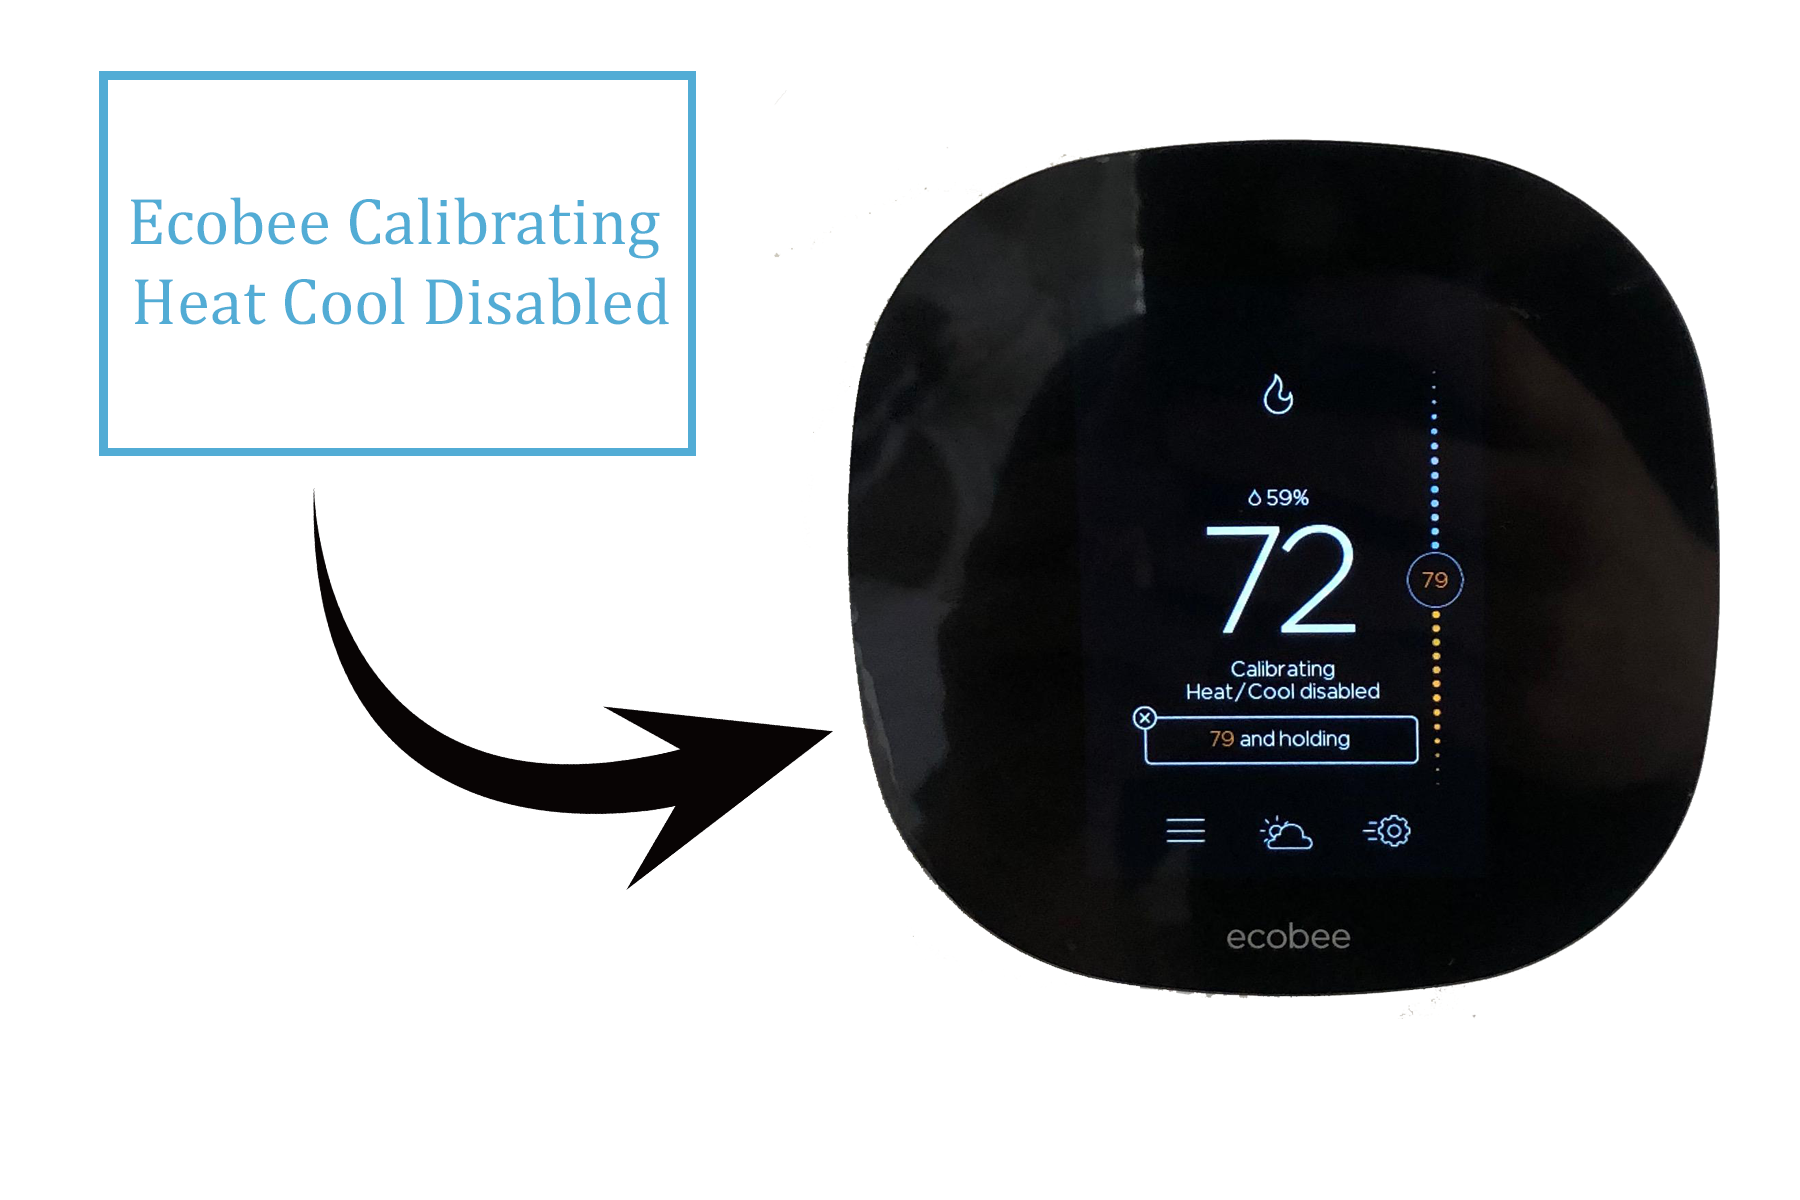 Ecobee Calibrating Heat Cool Disabled